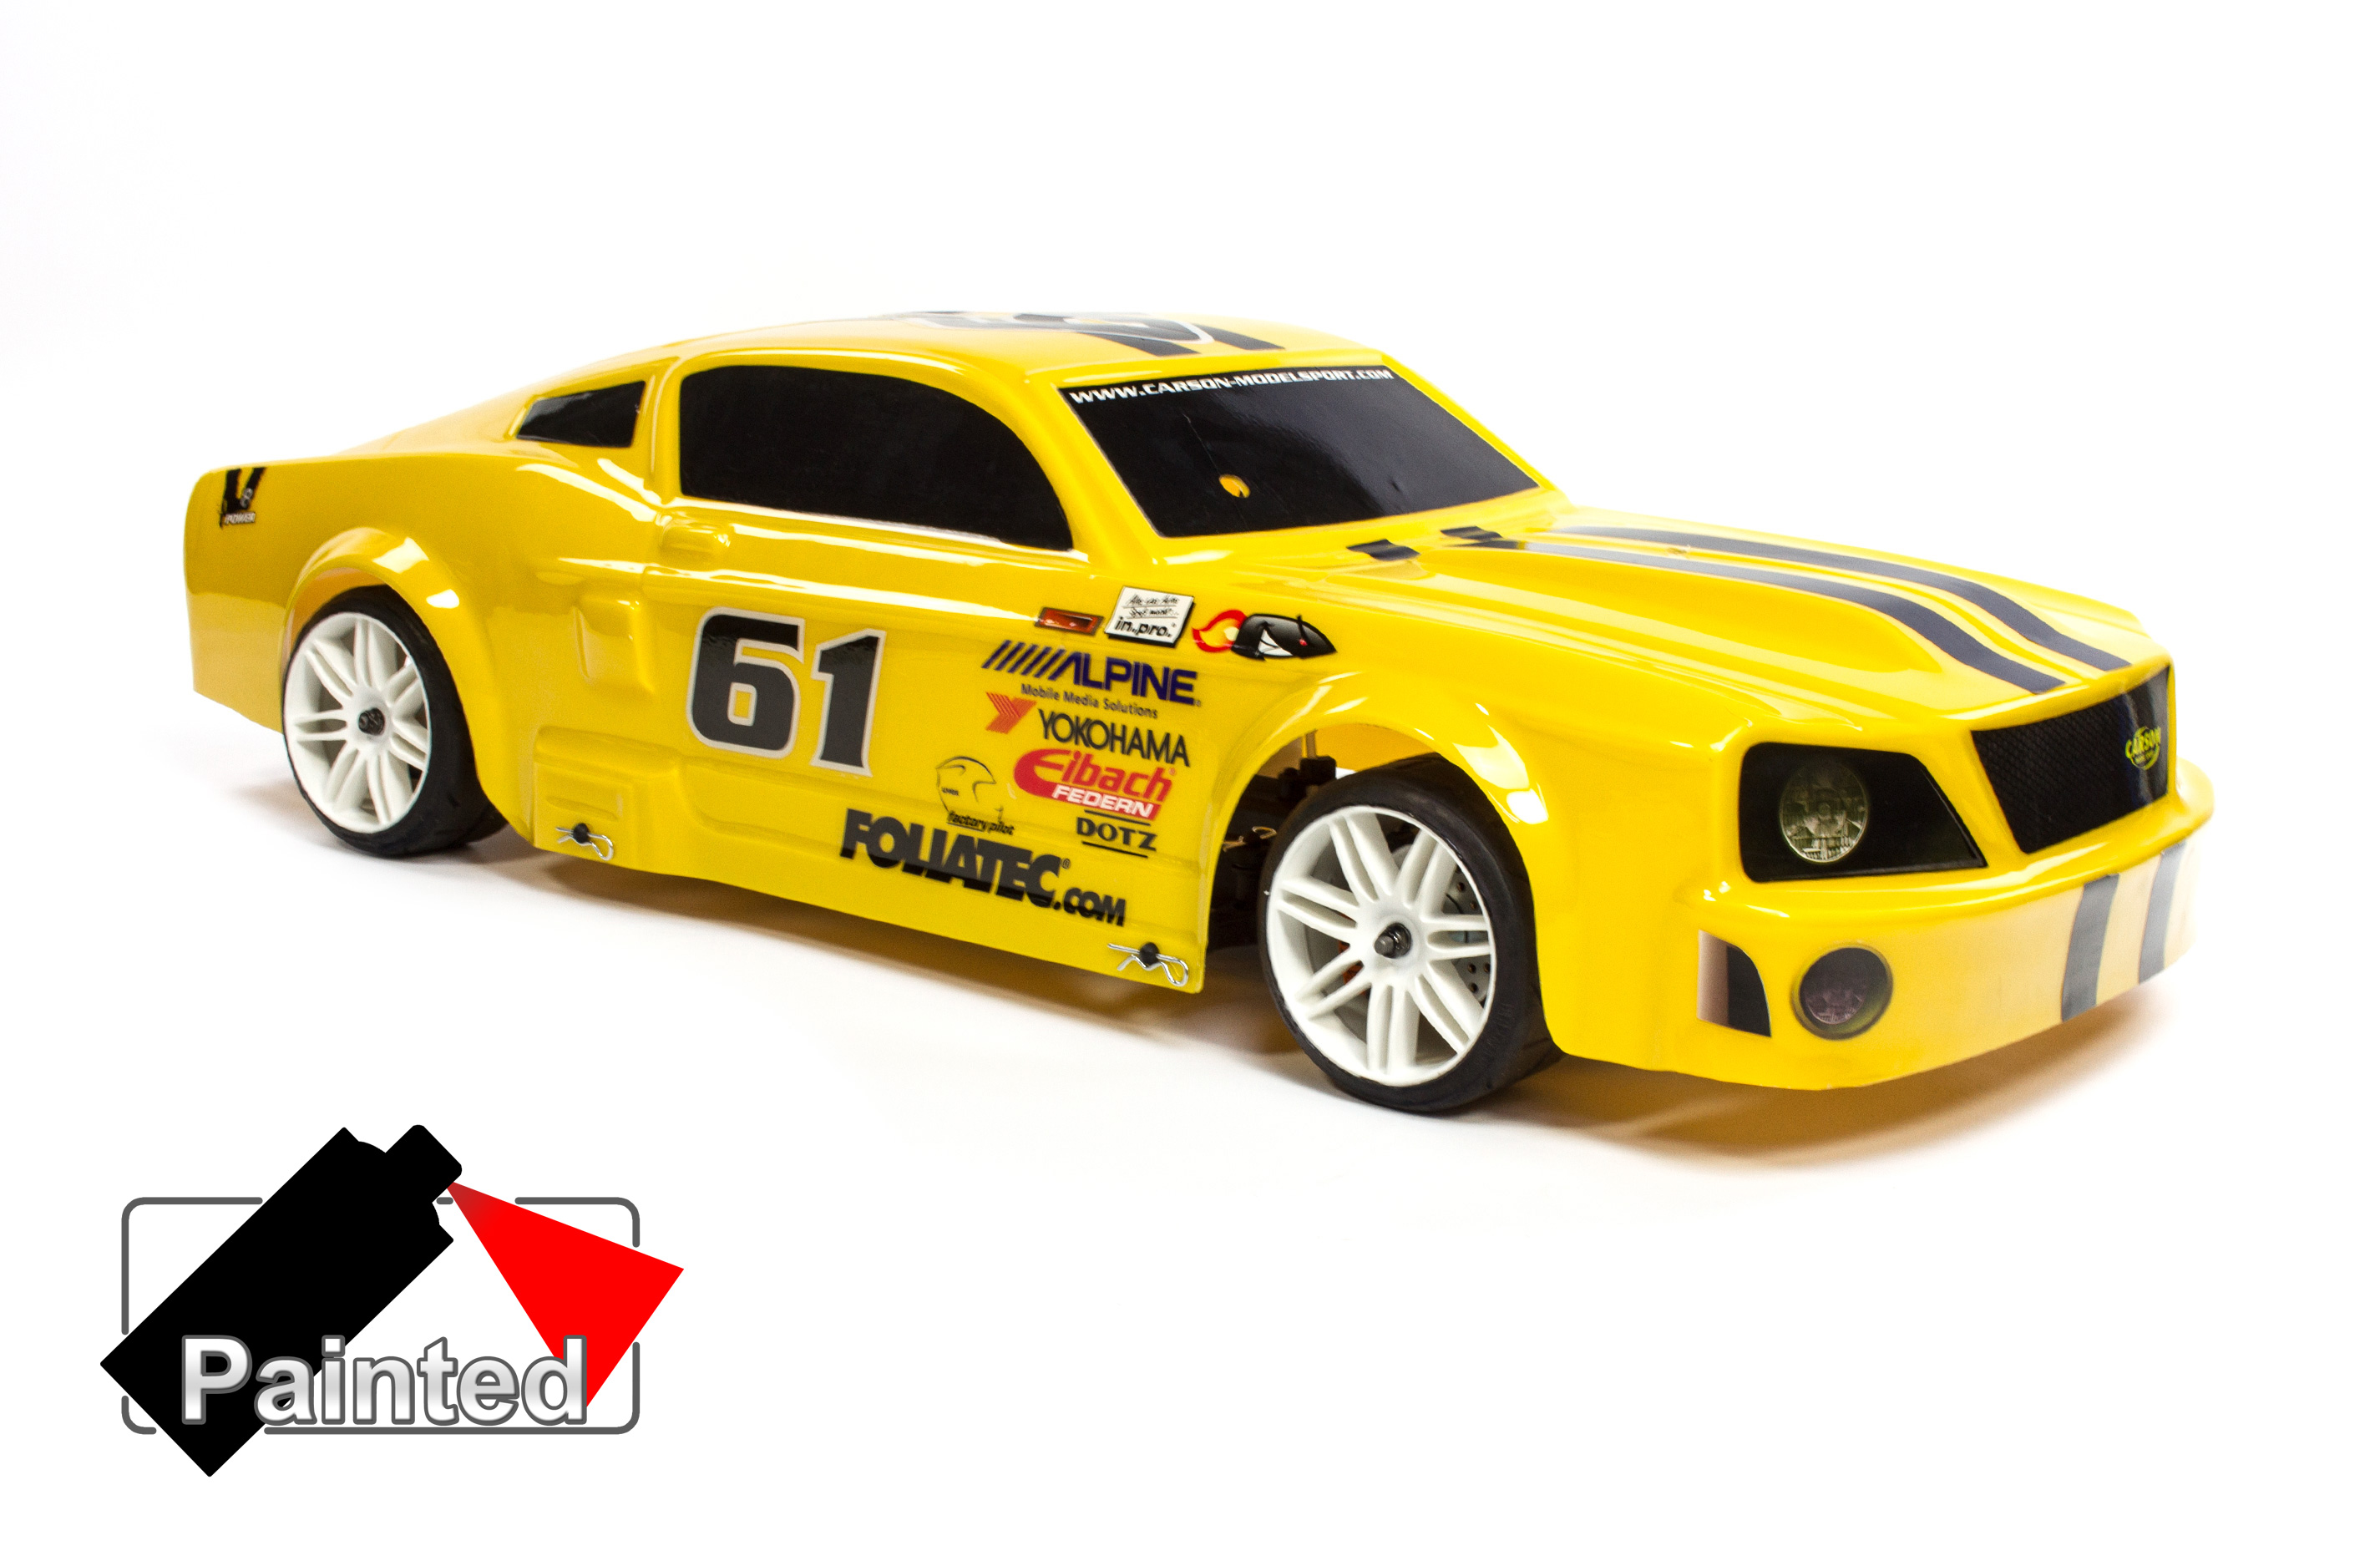 FG Sportsline 4WD-530 with Ford Mustang body